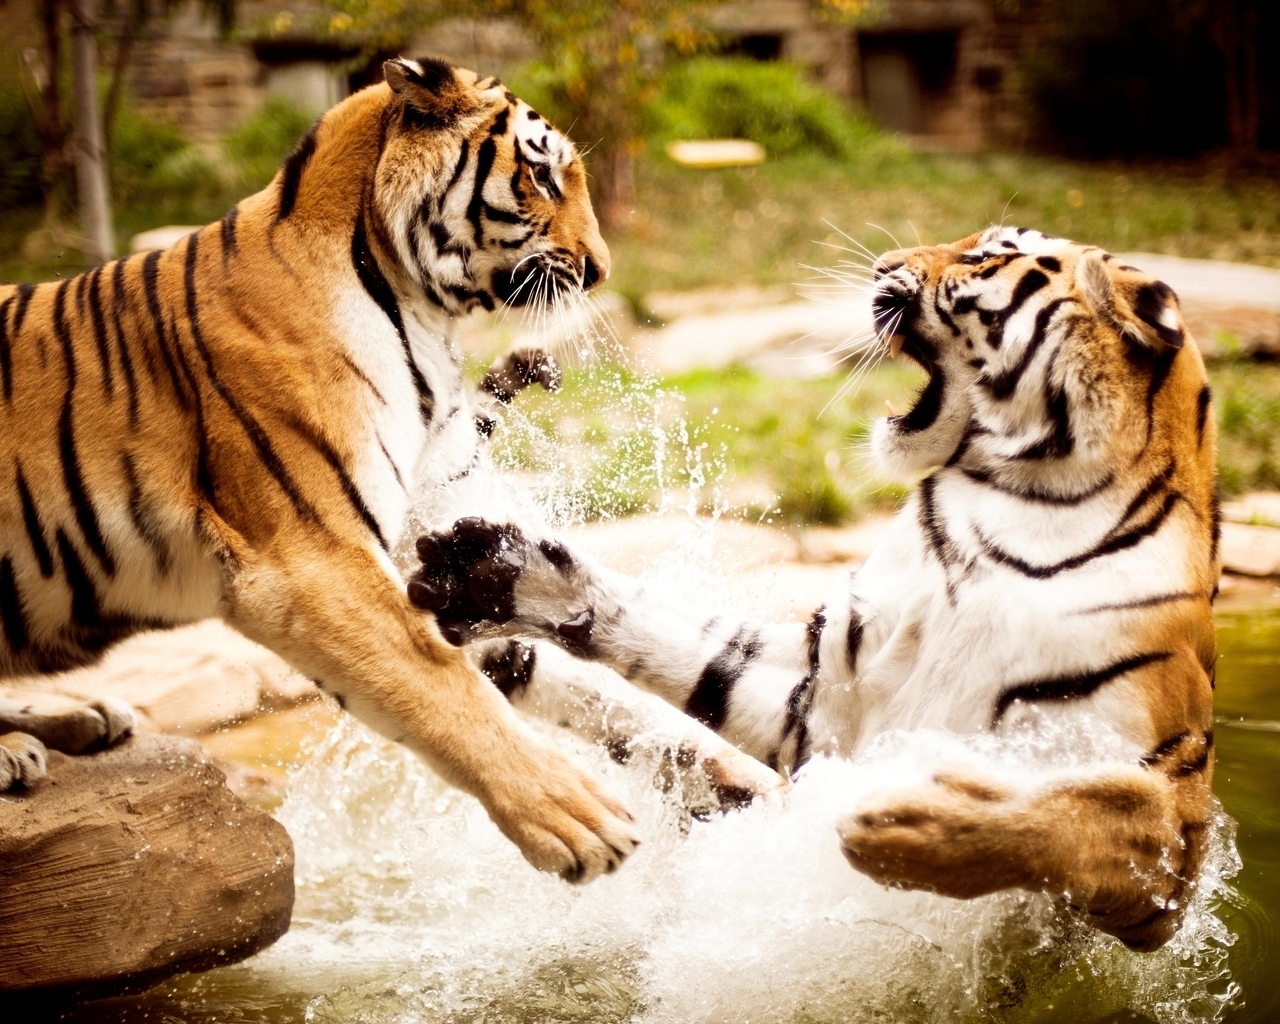 Tigers Fight for 1280 x 1024 resolution